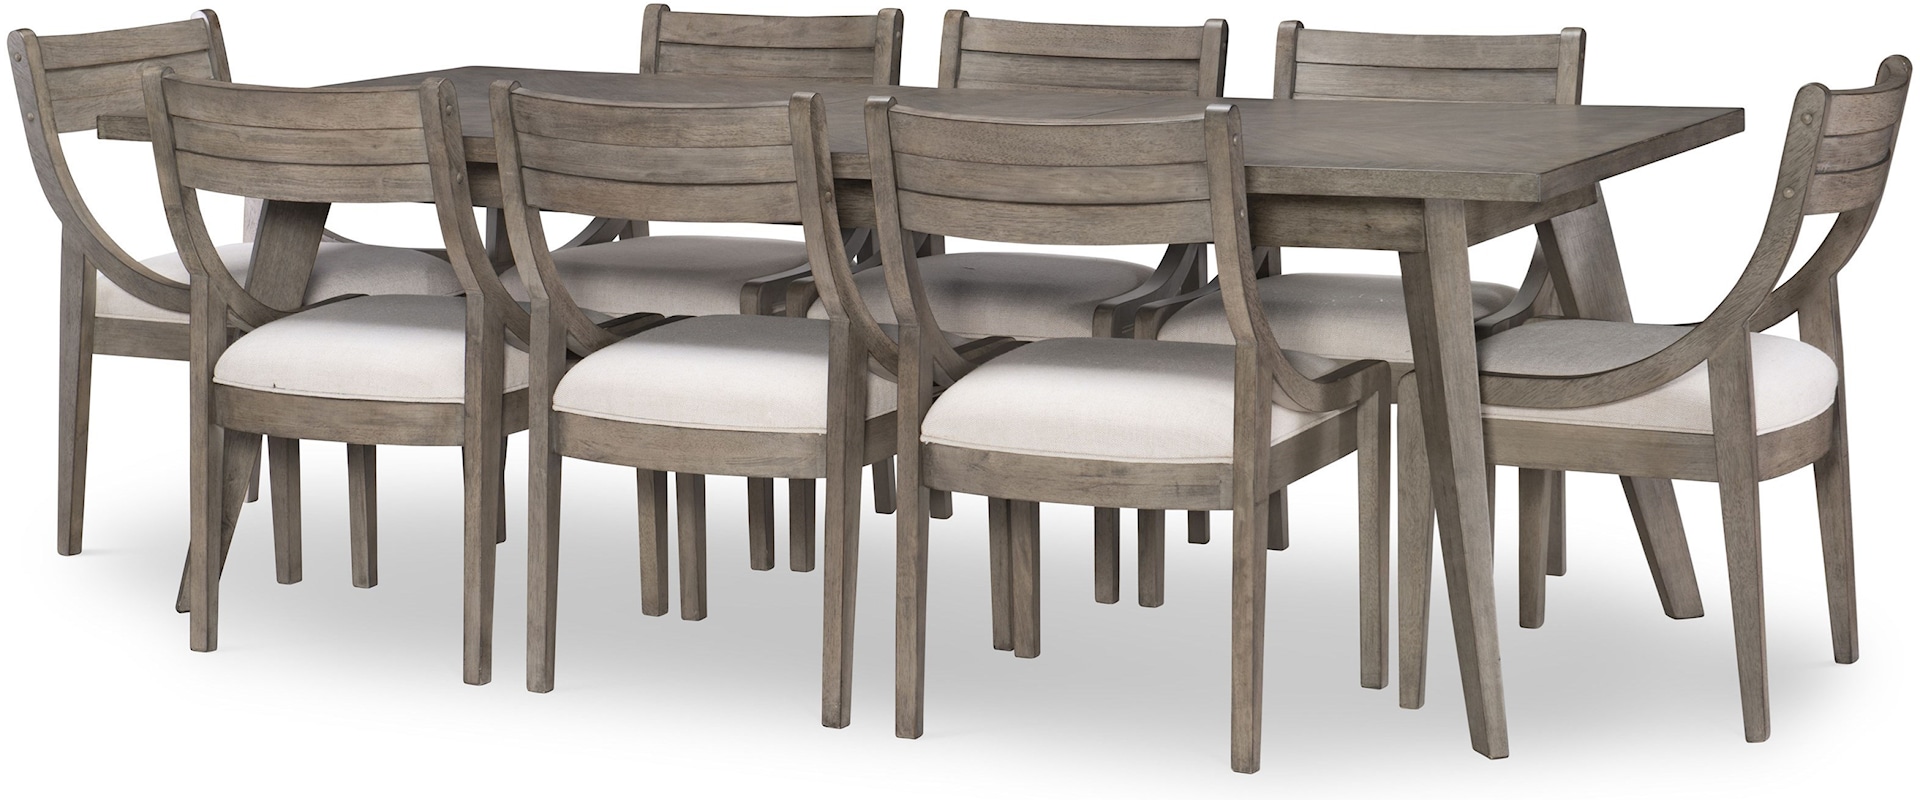 9-Piece Rectangular Table and Chair Set